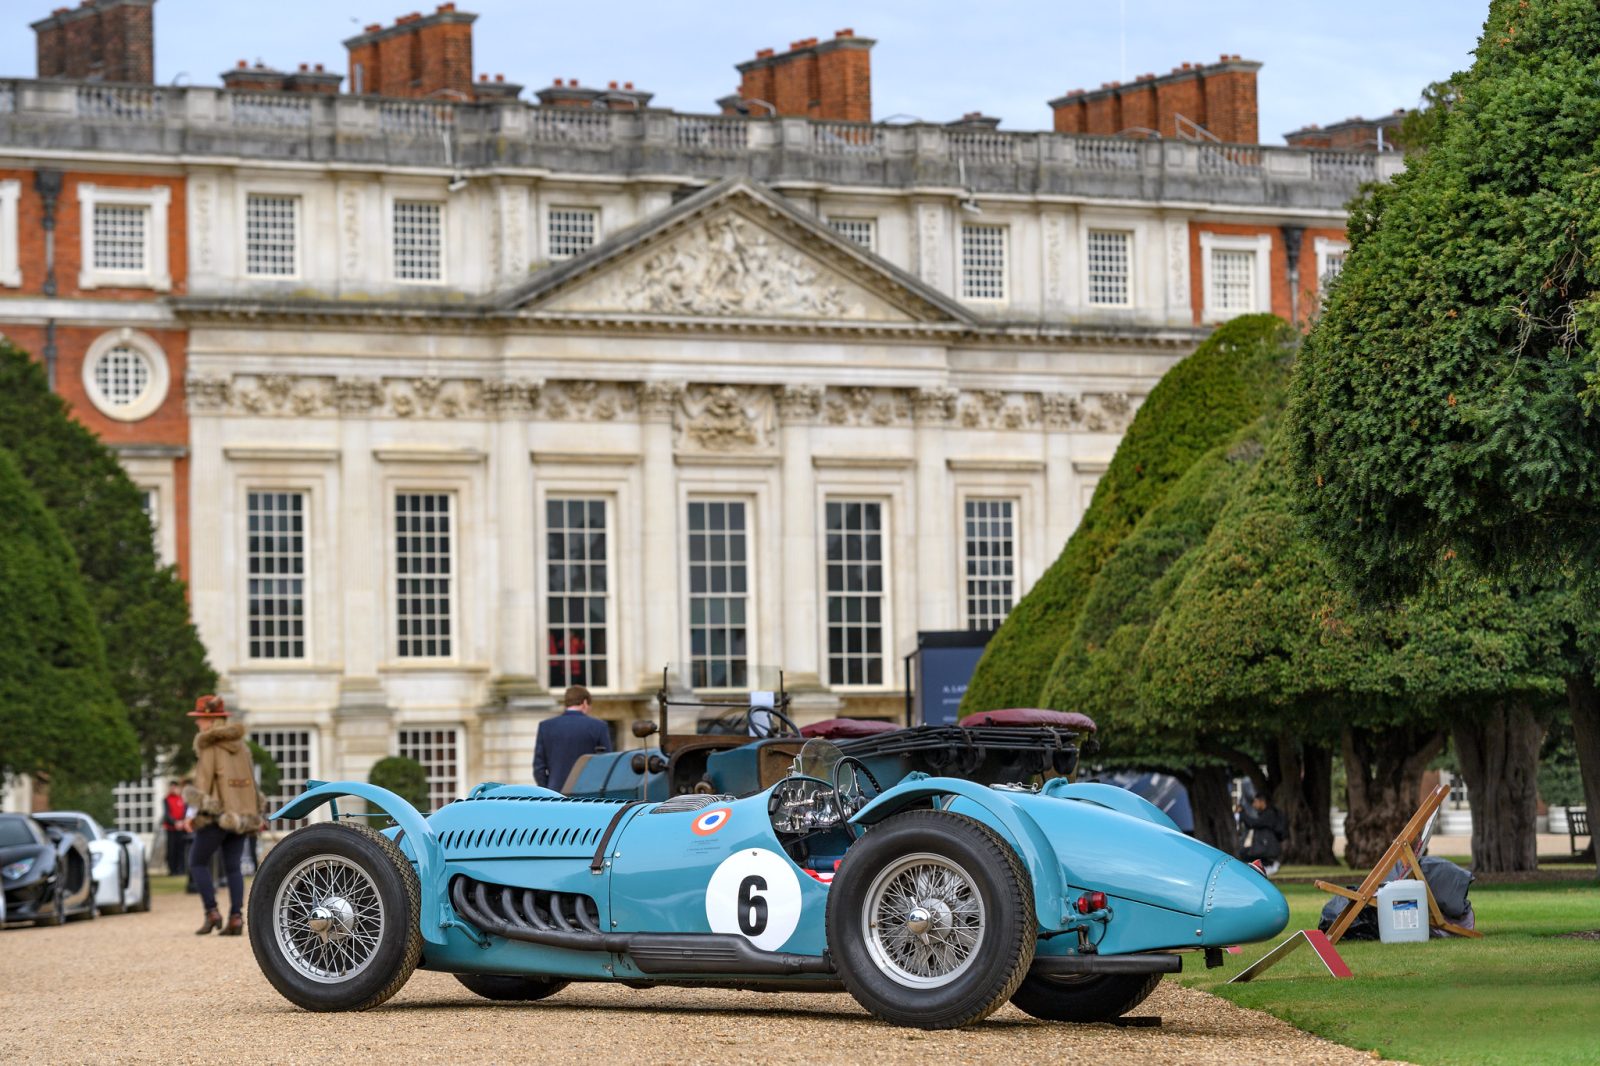 CONCOURS OF ELEGANCE ON TRACK FOR A GREAT EVENT IN SEPTEMBER AT HAMPTON COURT PALACE